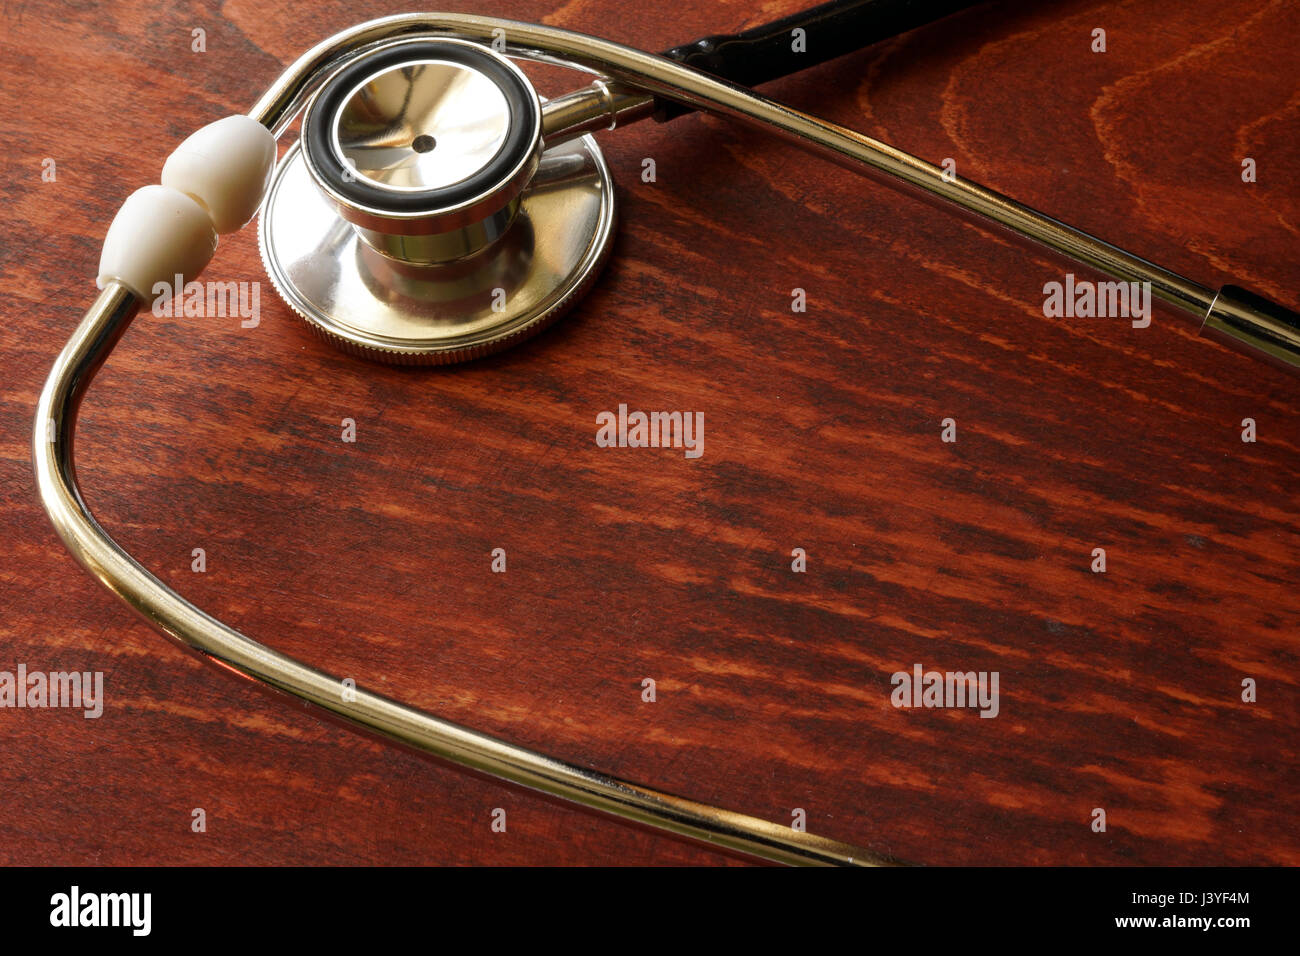 Health care background. Stethoscope on a wooden table. Stock Photo